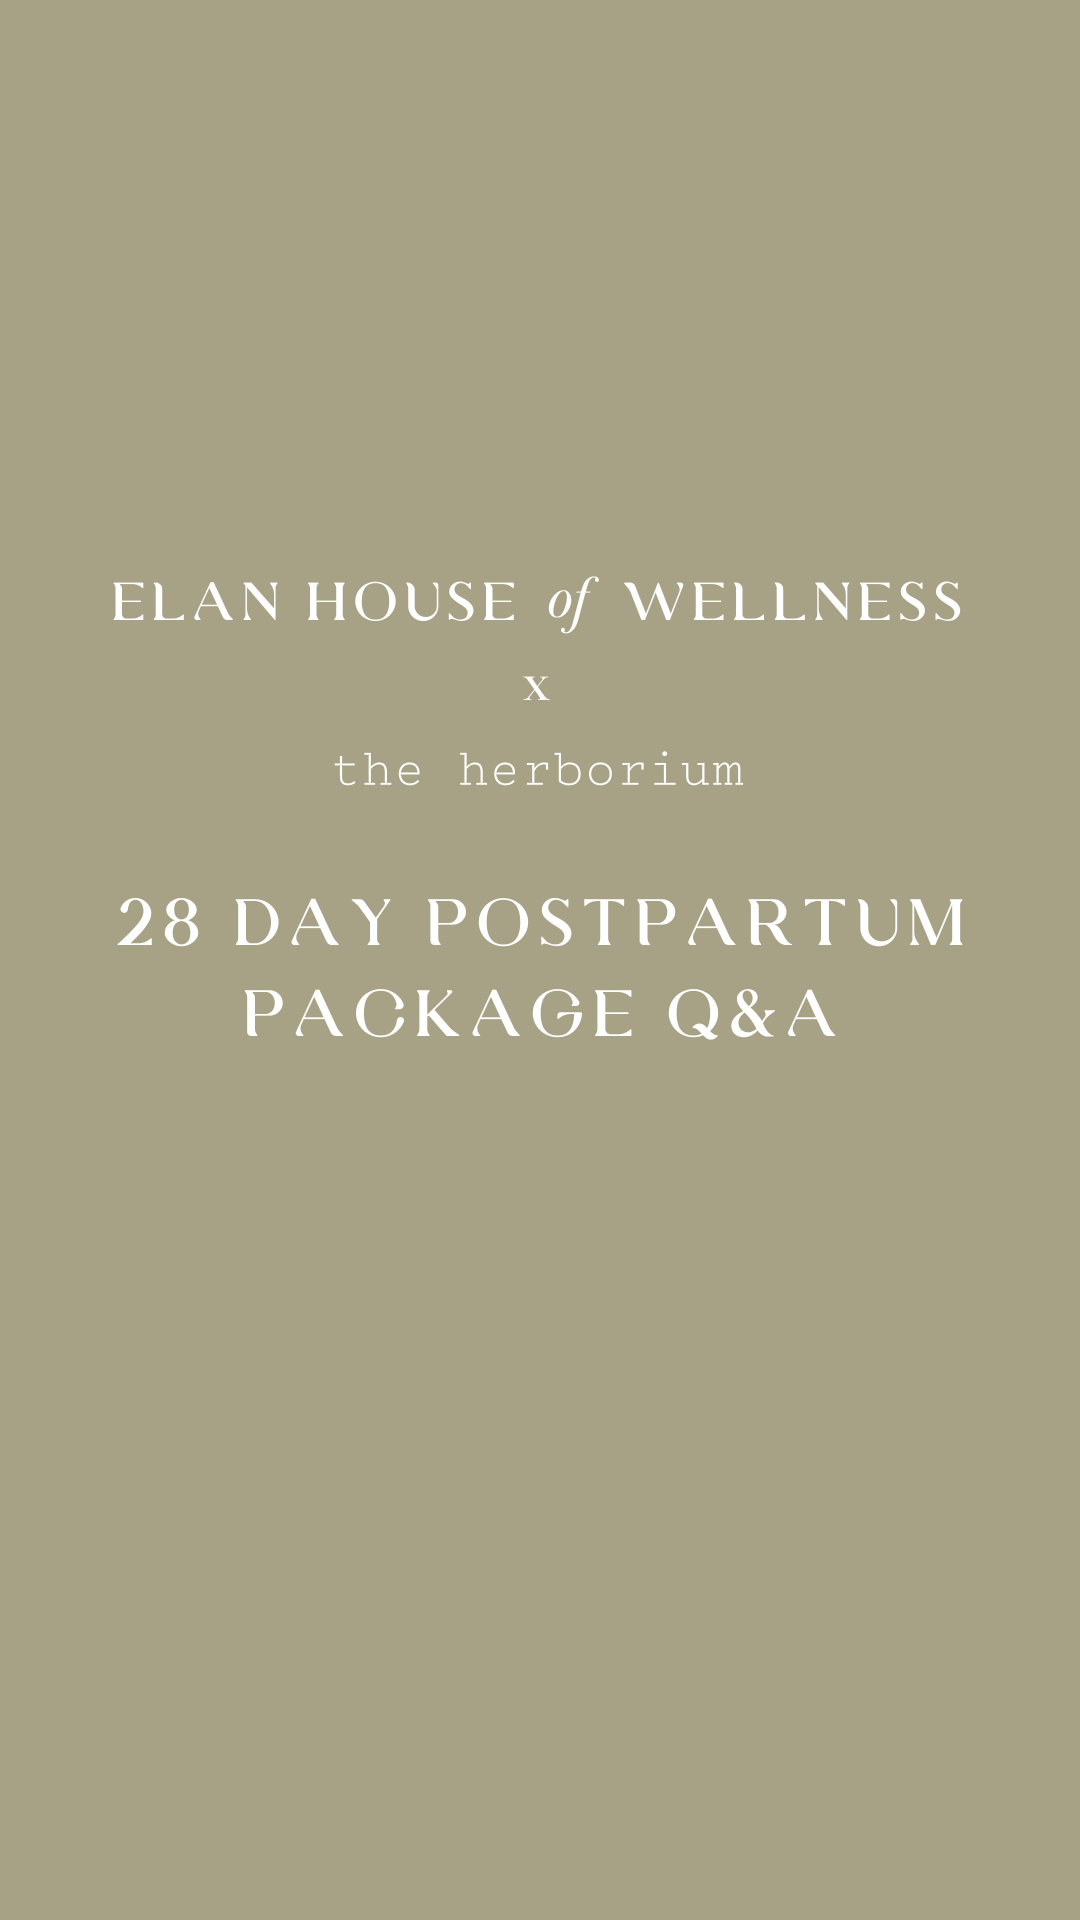 28 Day Postpartum Package Q&A